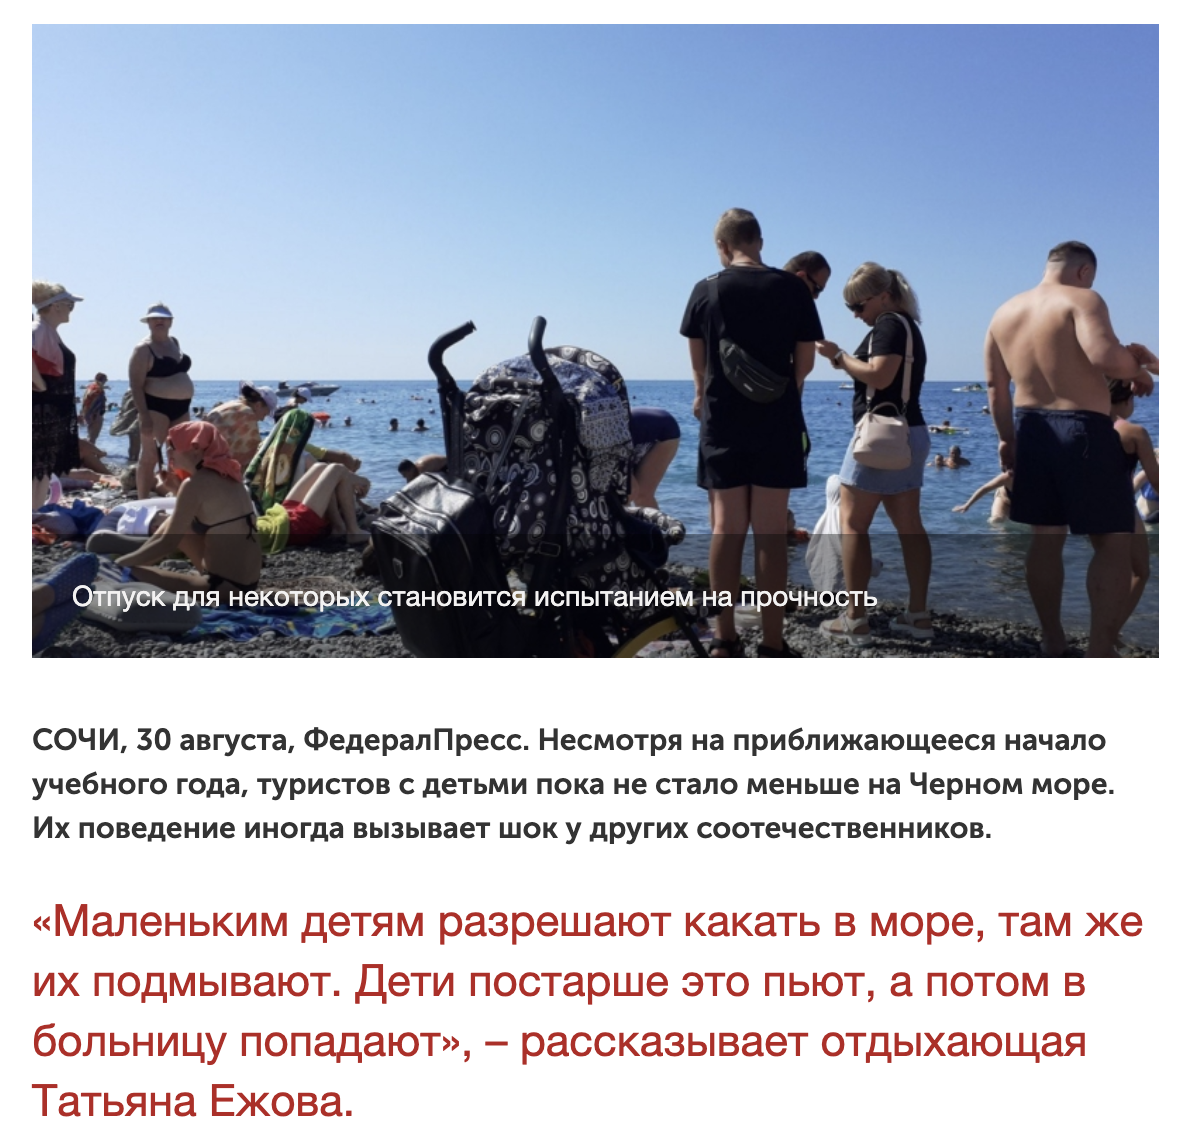 People defecate in the Black Sea and drink water from it: Russians shocked on vacation in Sochi